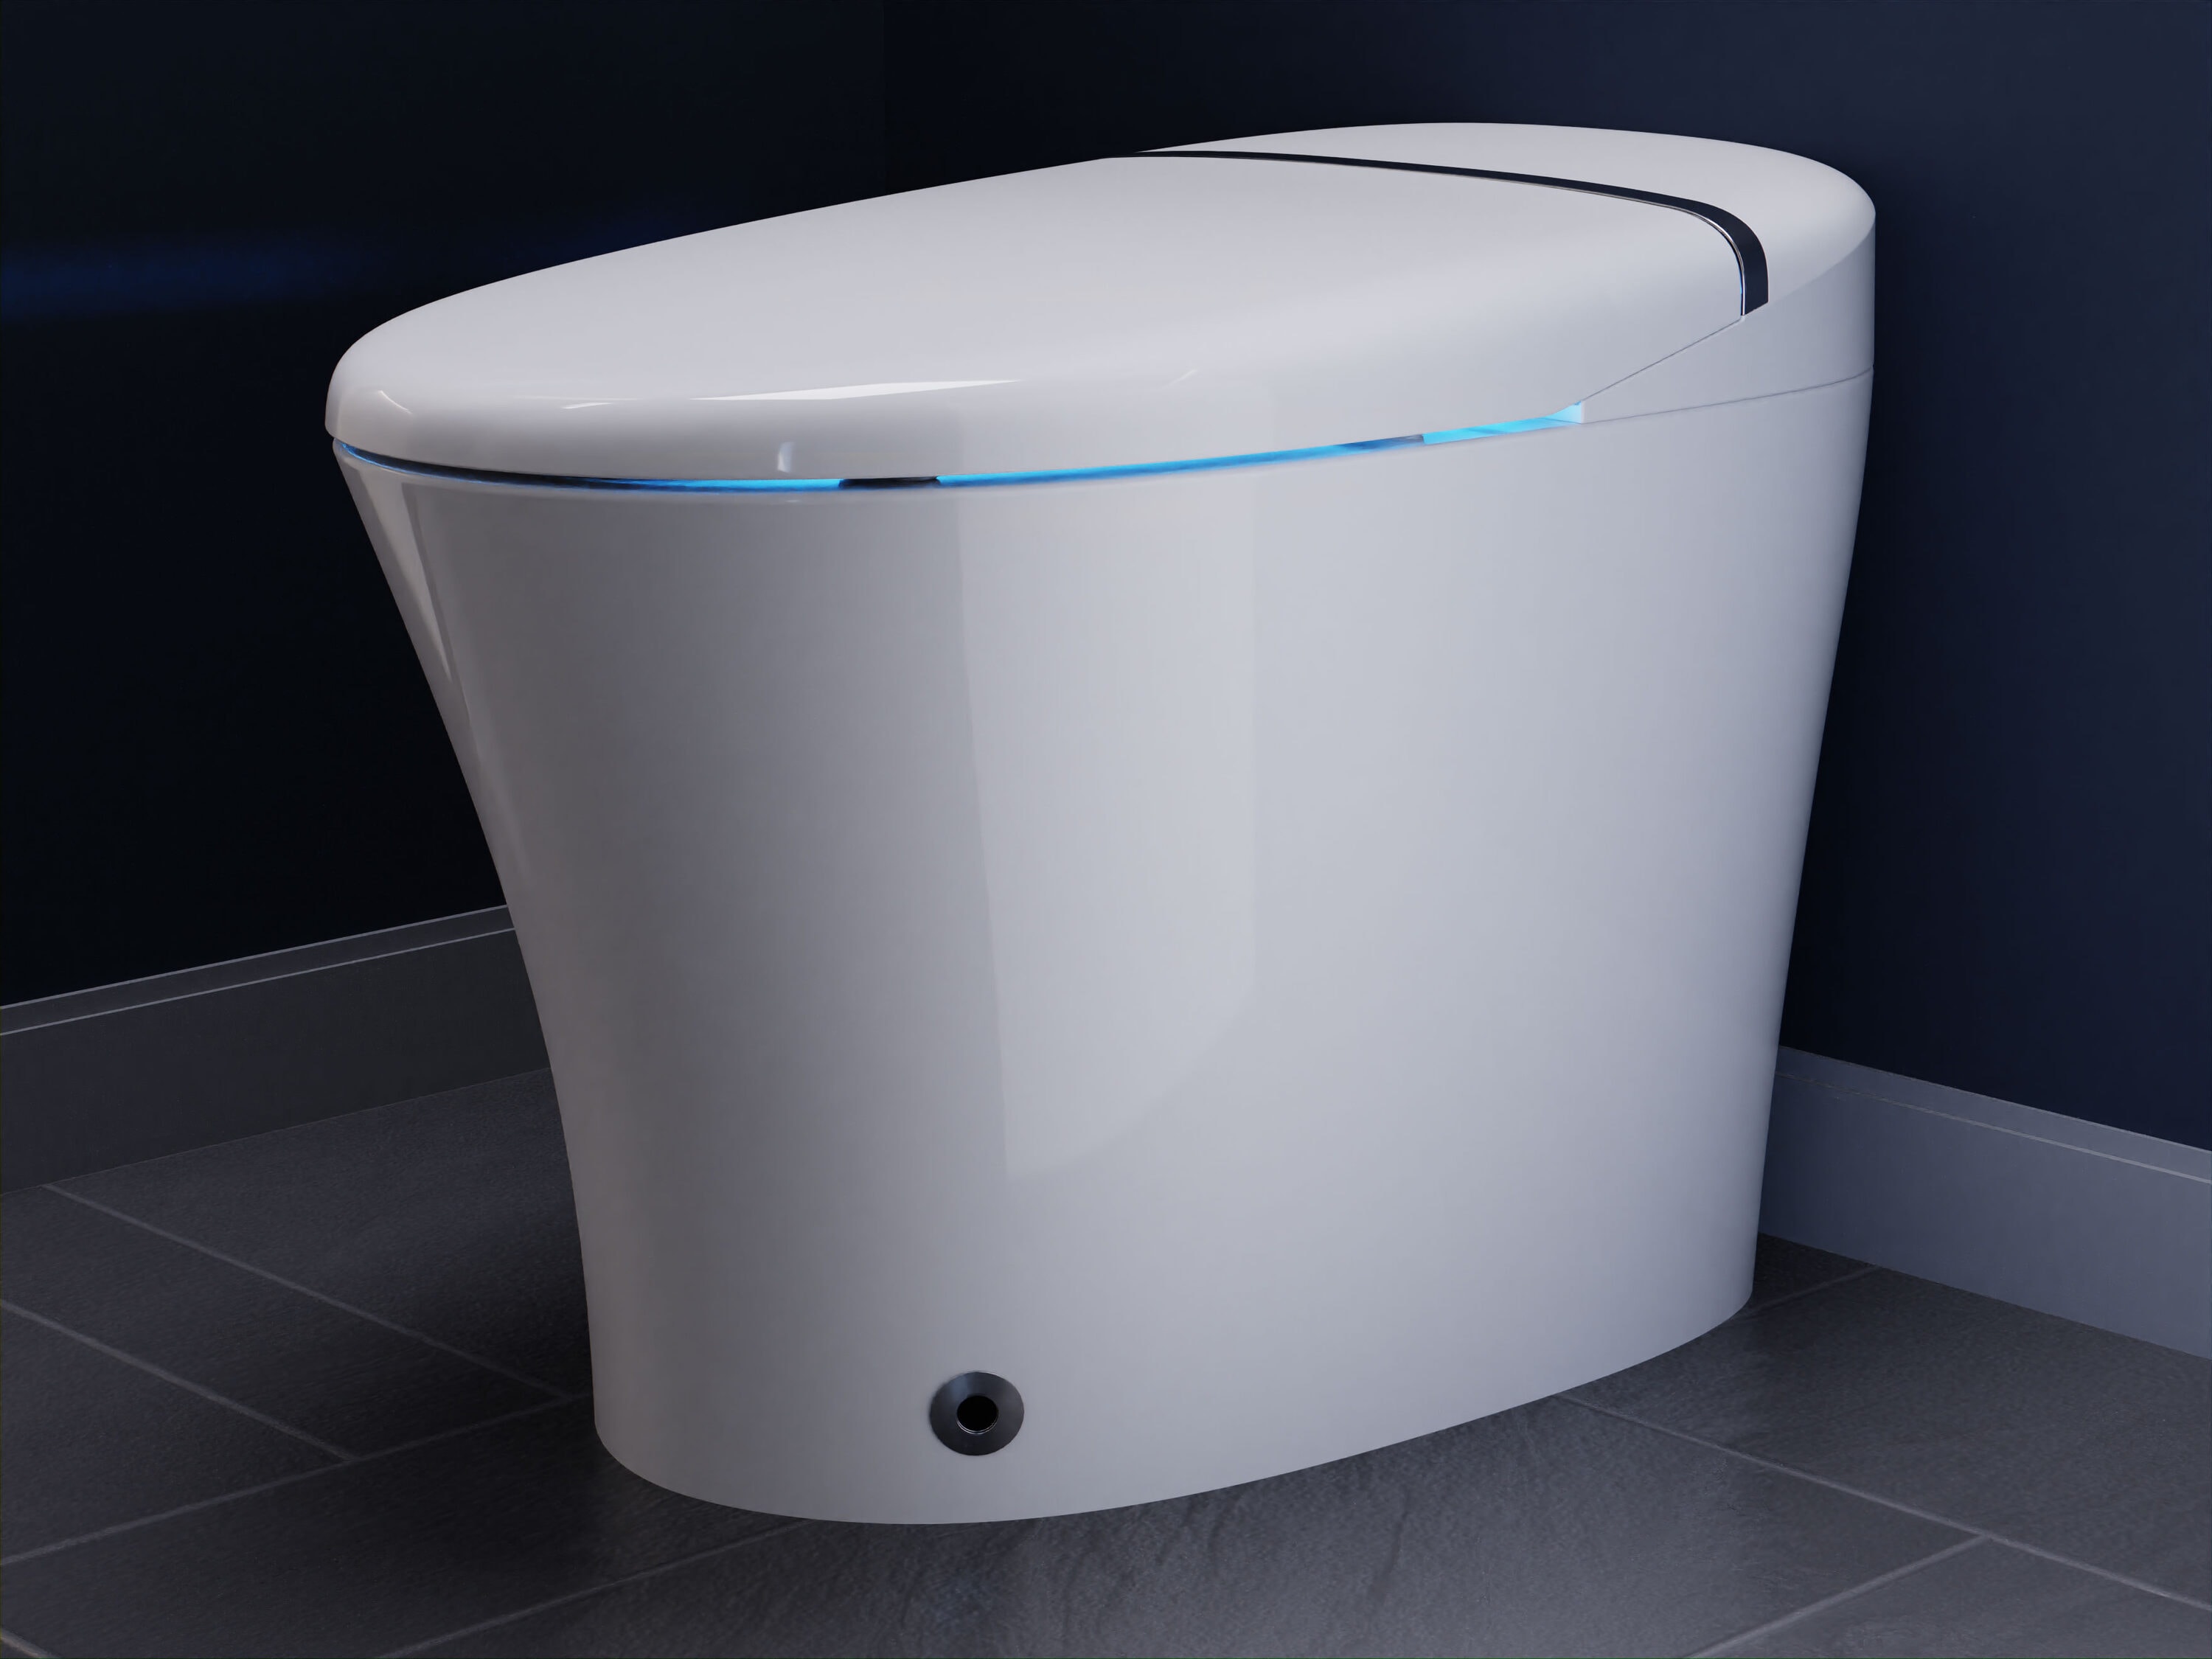 Here's how smart toilets of the future could protect your health